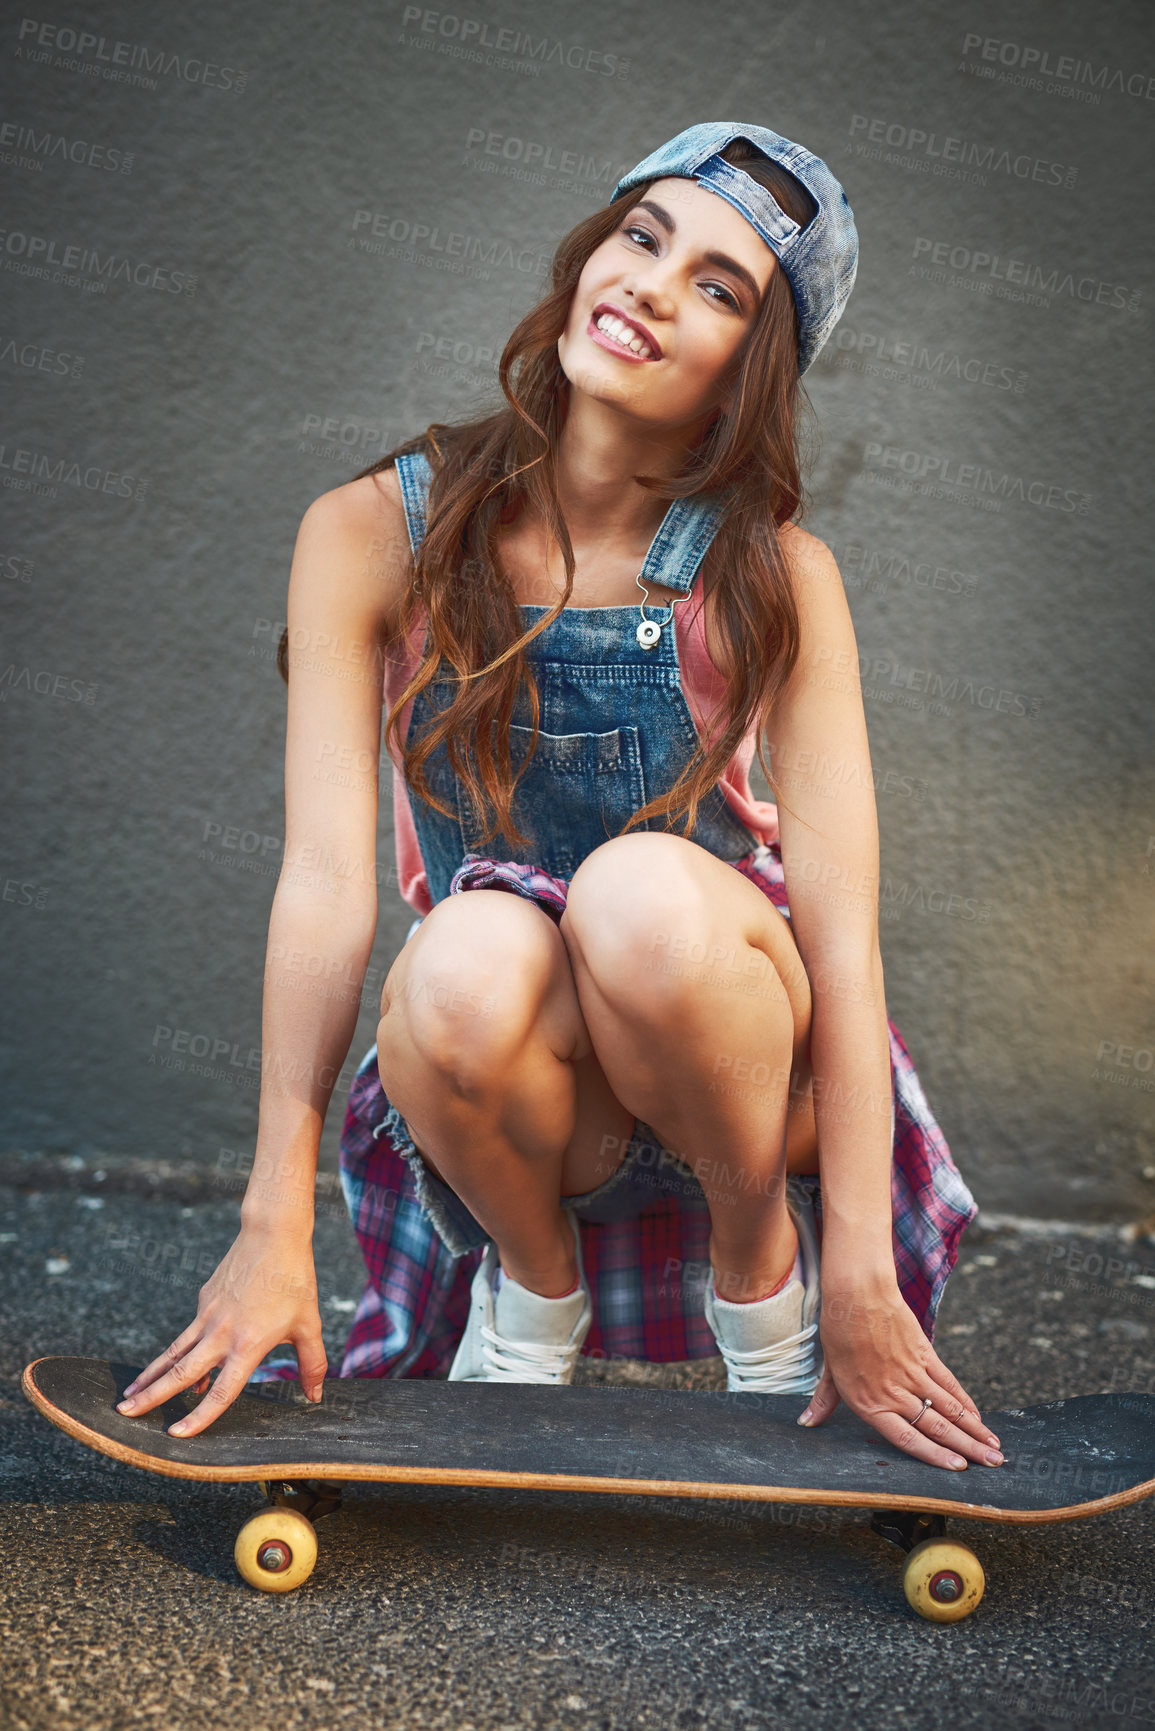 Buy stock photo Portrait of a cheerful young woman wearing a cap while being seated next to a skateboard against a grey background